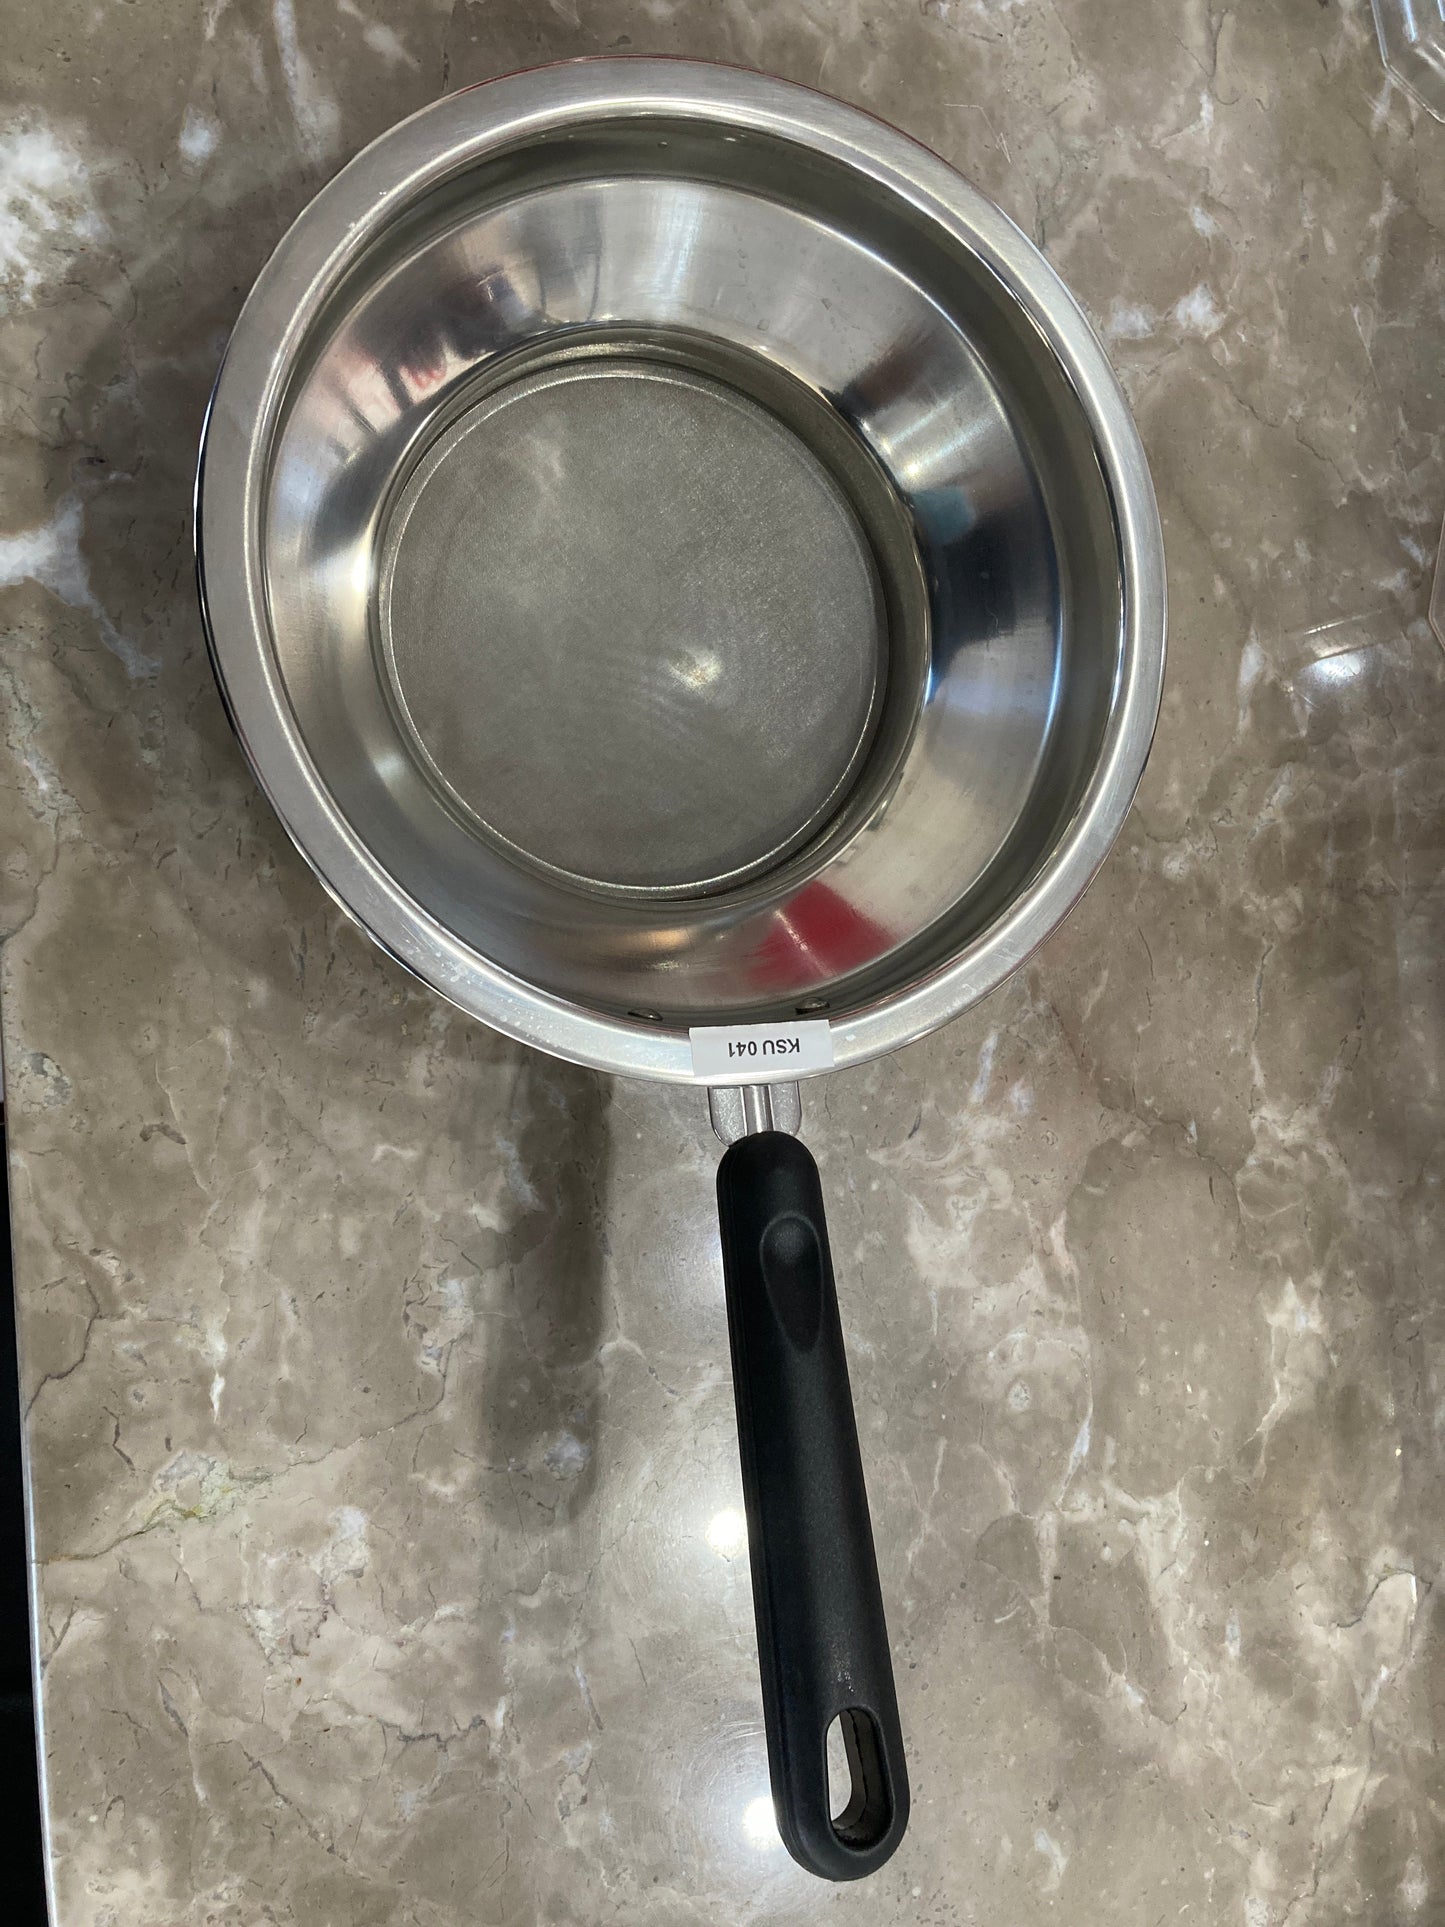 Tea Filter with handle